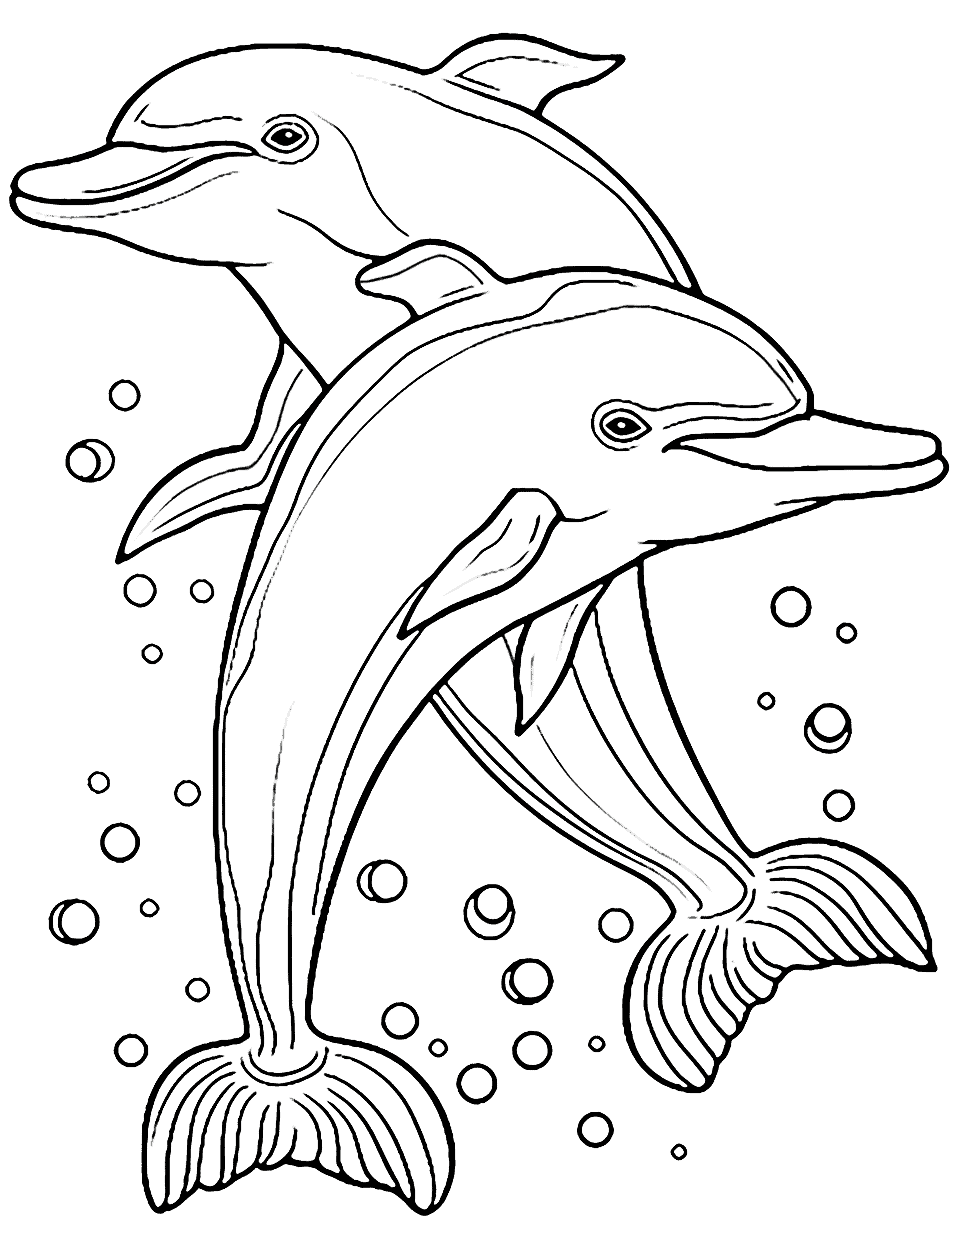 Friendly Dolphins Animal Coloring Page - Two dolphins swimming side by side, looking friendly and cheerful.